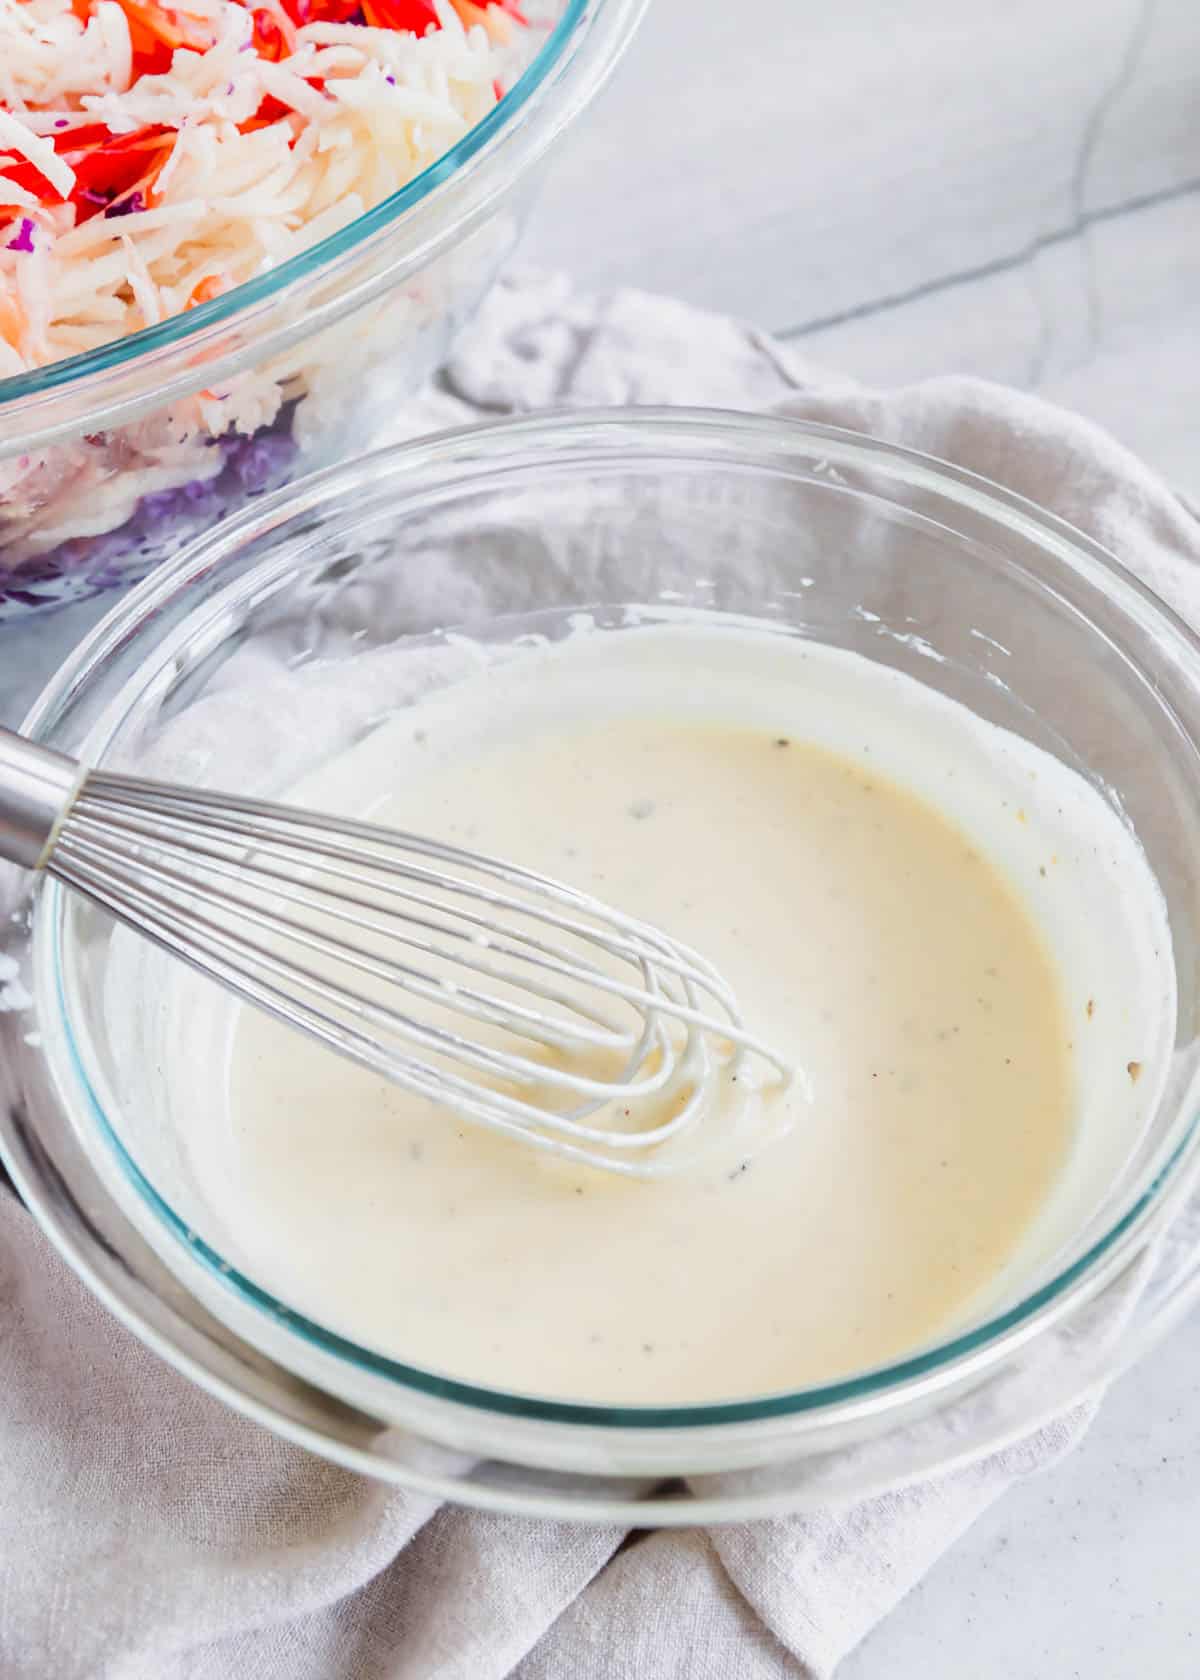 Yogurt based coleslaw dressing in a small glass bowl with a whisk.